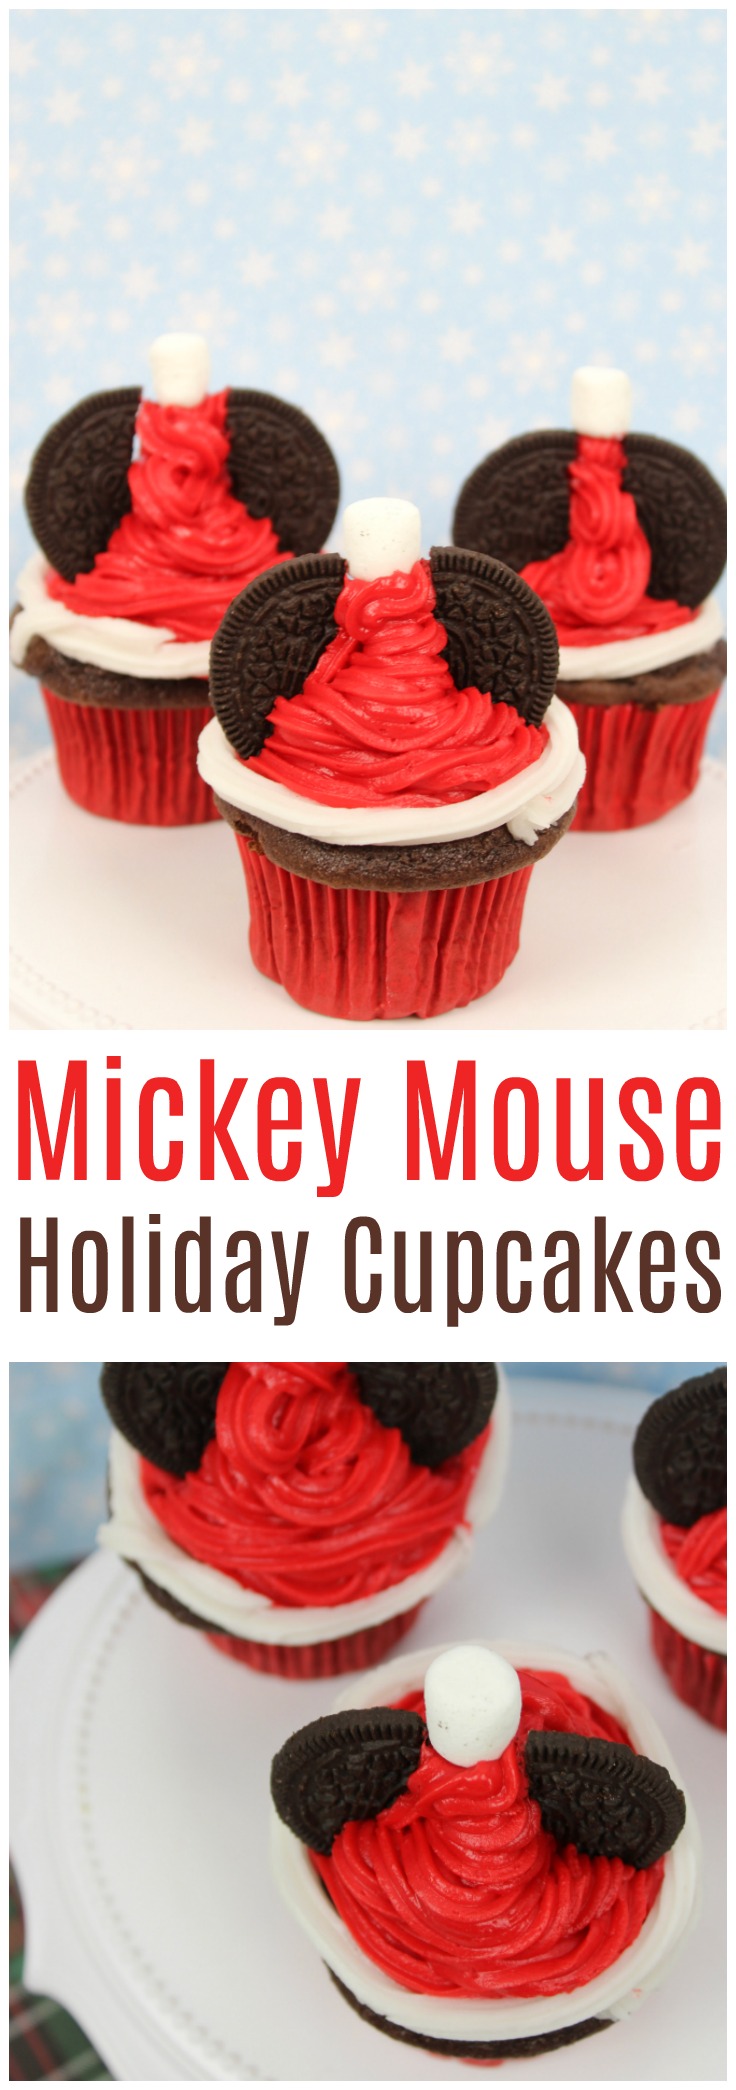 Mickey Mouse Holiday Cupcakes - These are so adorable and easy to make. A fun way to bring the joy of Disney home this Holiday with this Santa hat cupcakes.